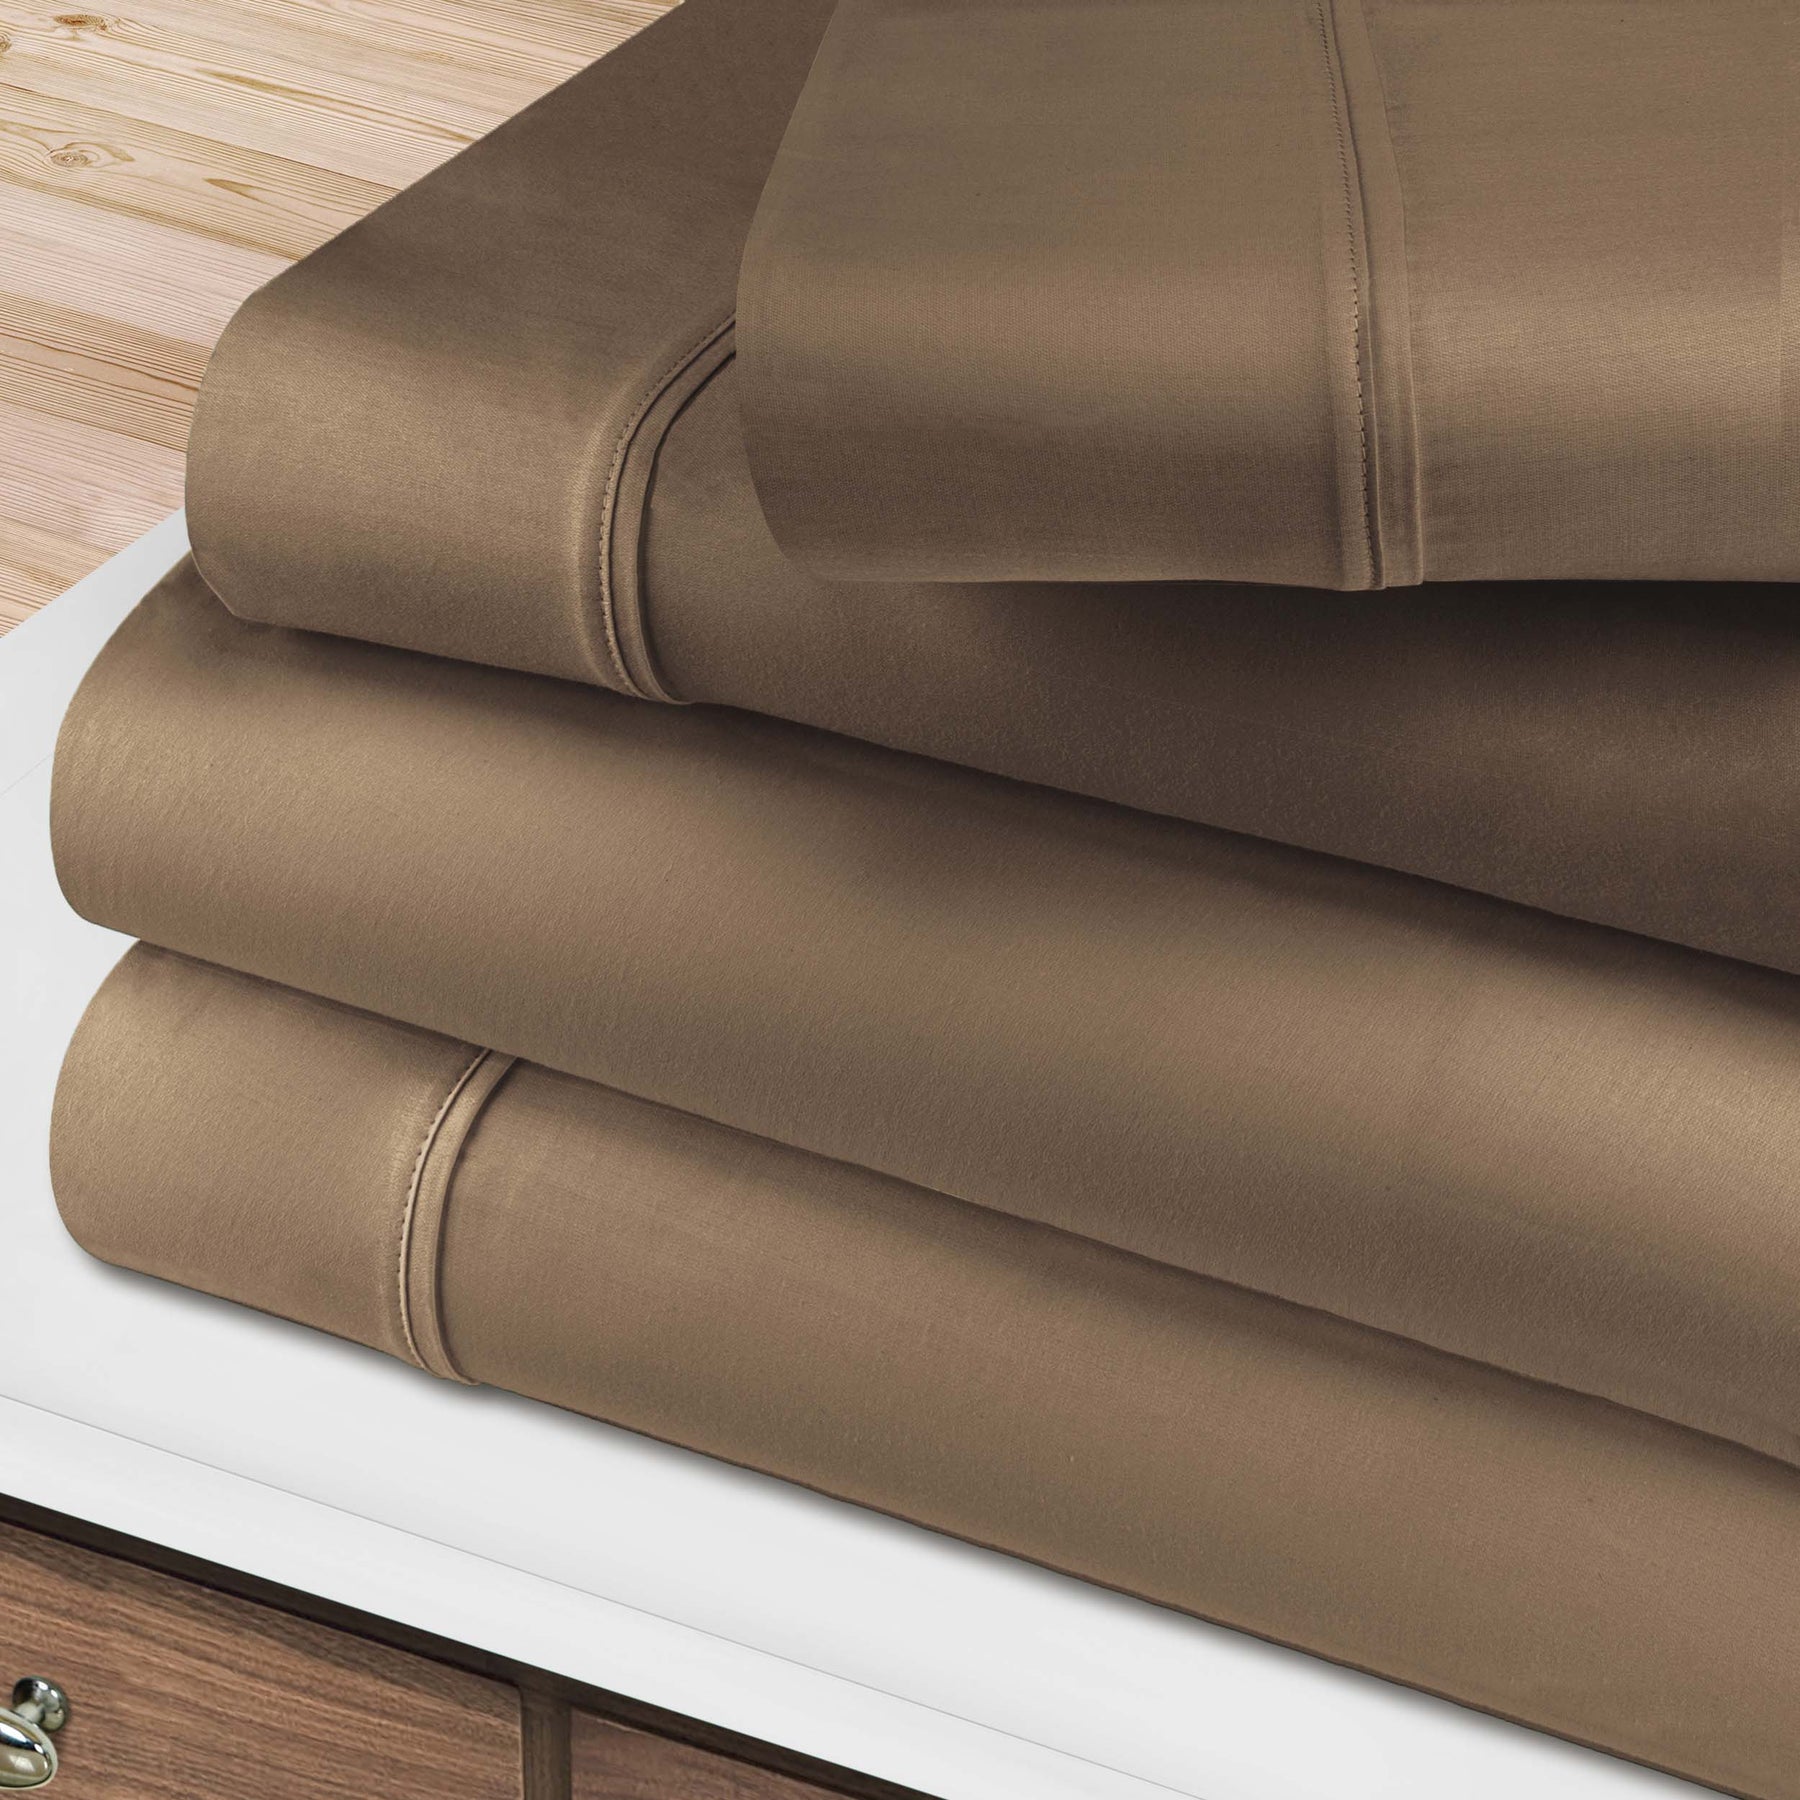 400 Thread Count Egyptian Cotton Solid Deep Pocket Sheet Set - Taupe